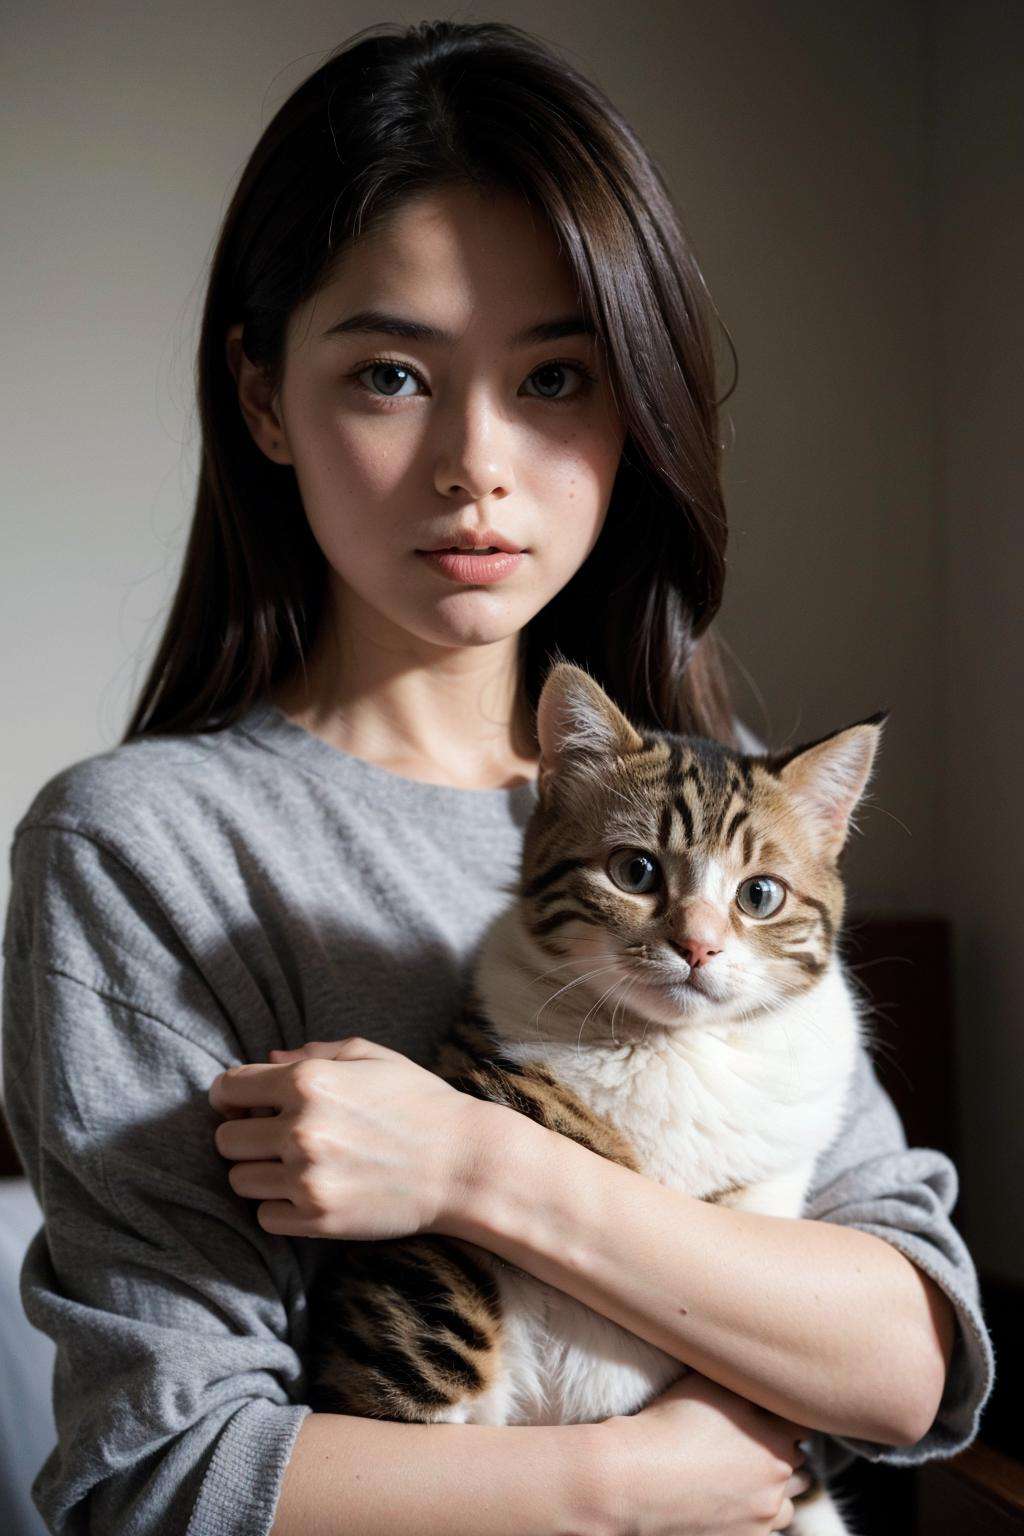 (high quality:1.3), (photo realistic:1.2), (girl holding  cute little cat:1.2),